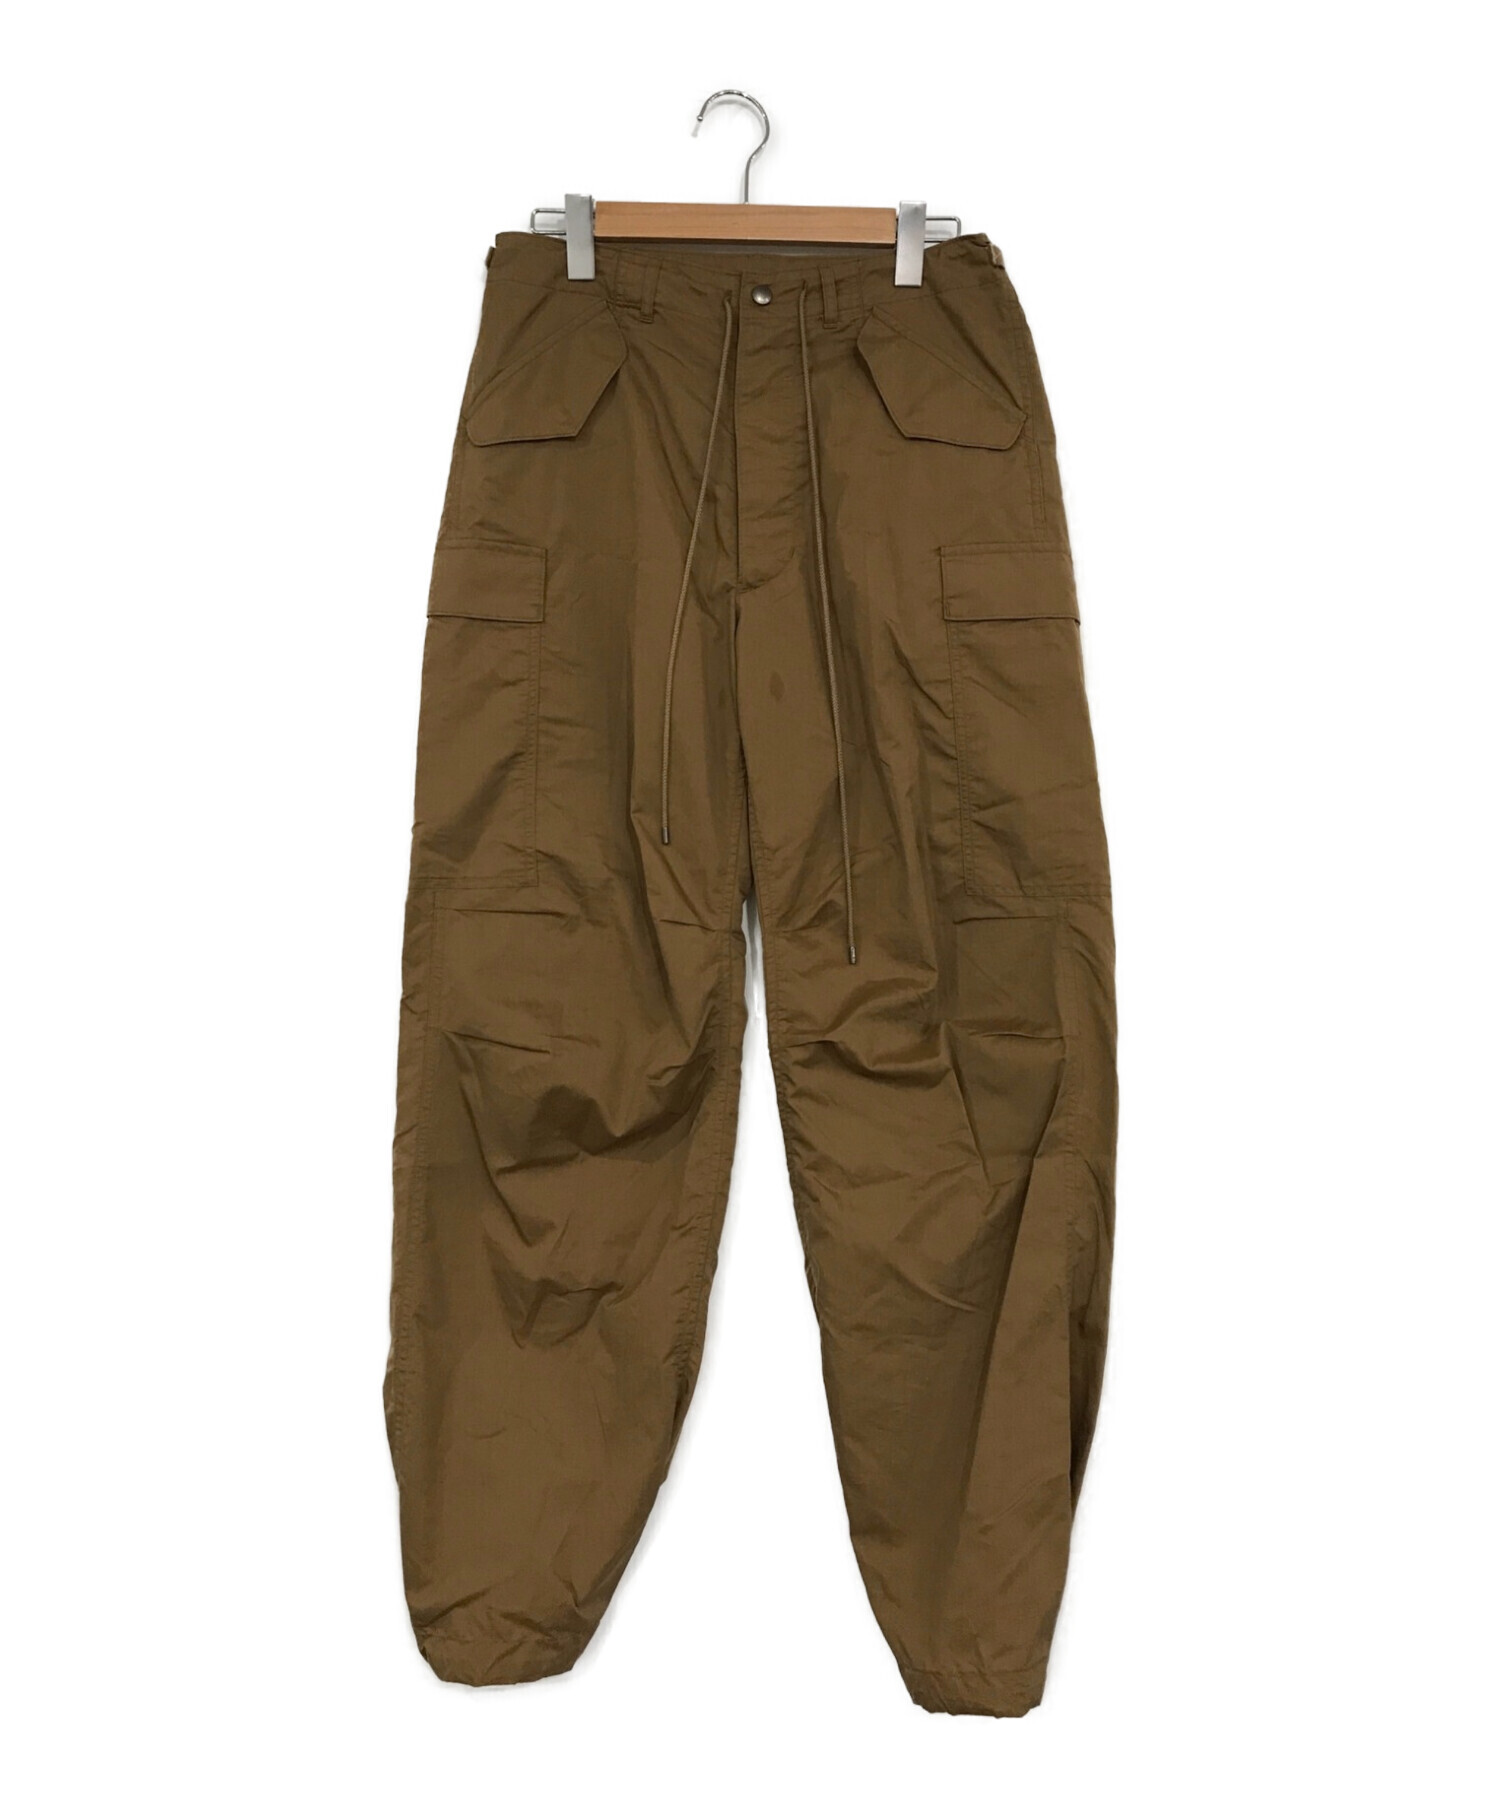 AURALEE - POLYESTER FATIGUE PANTS